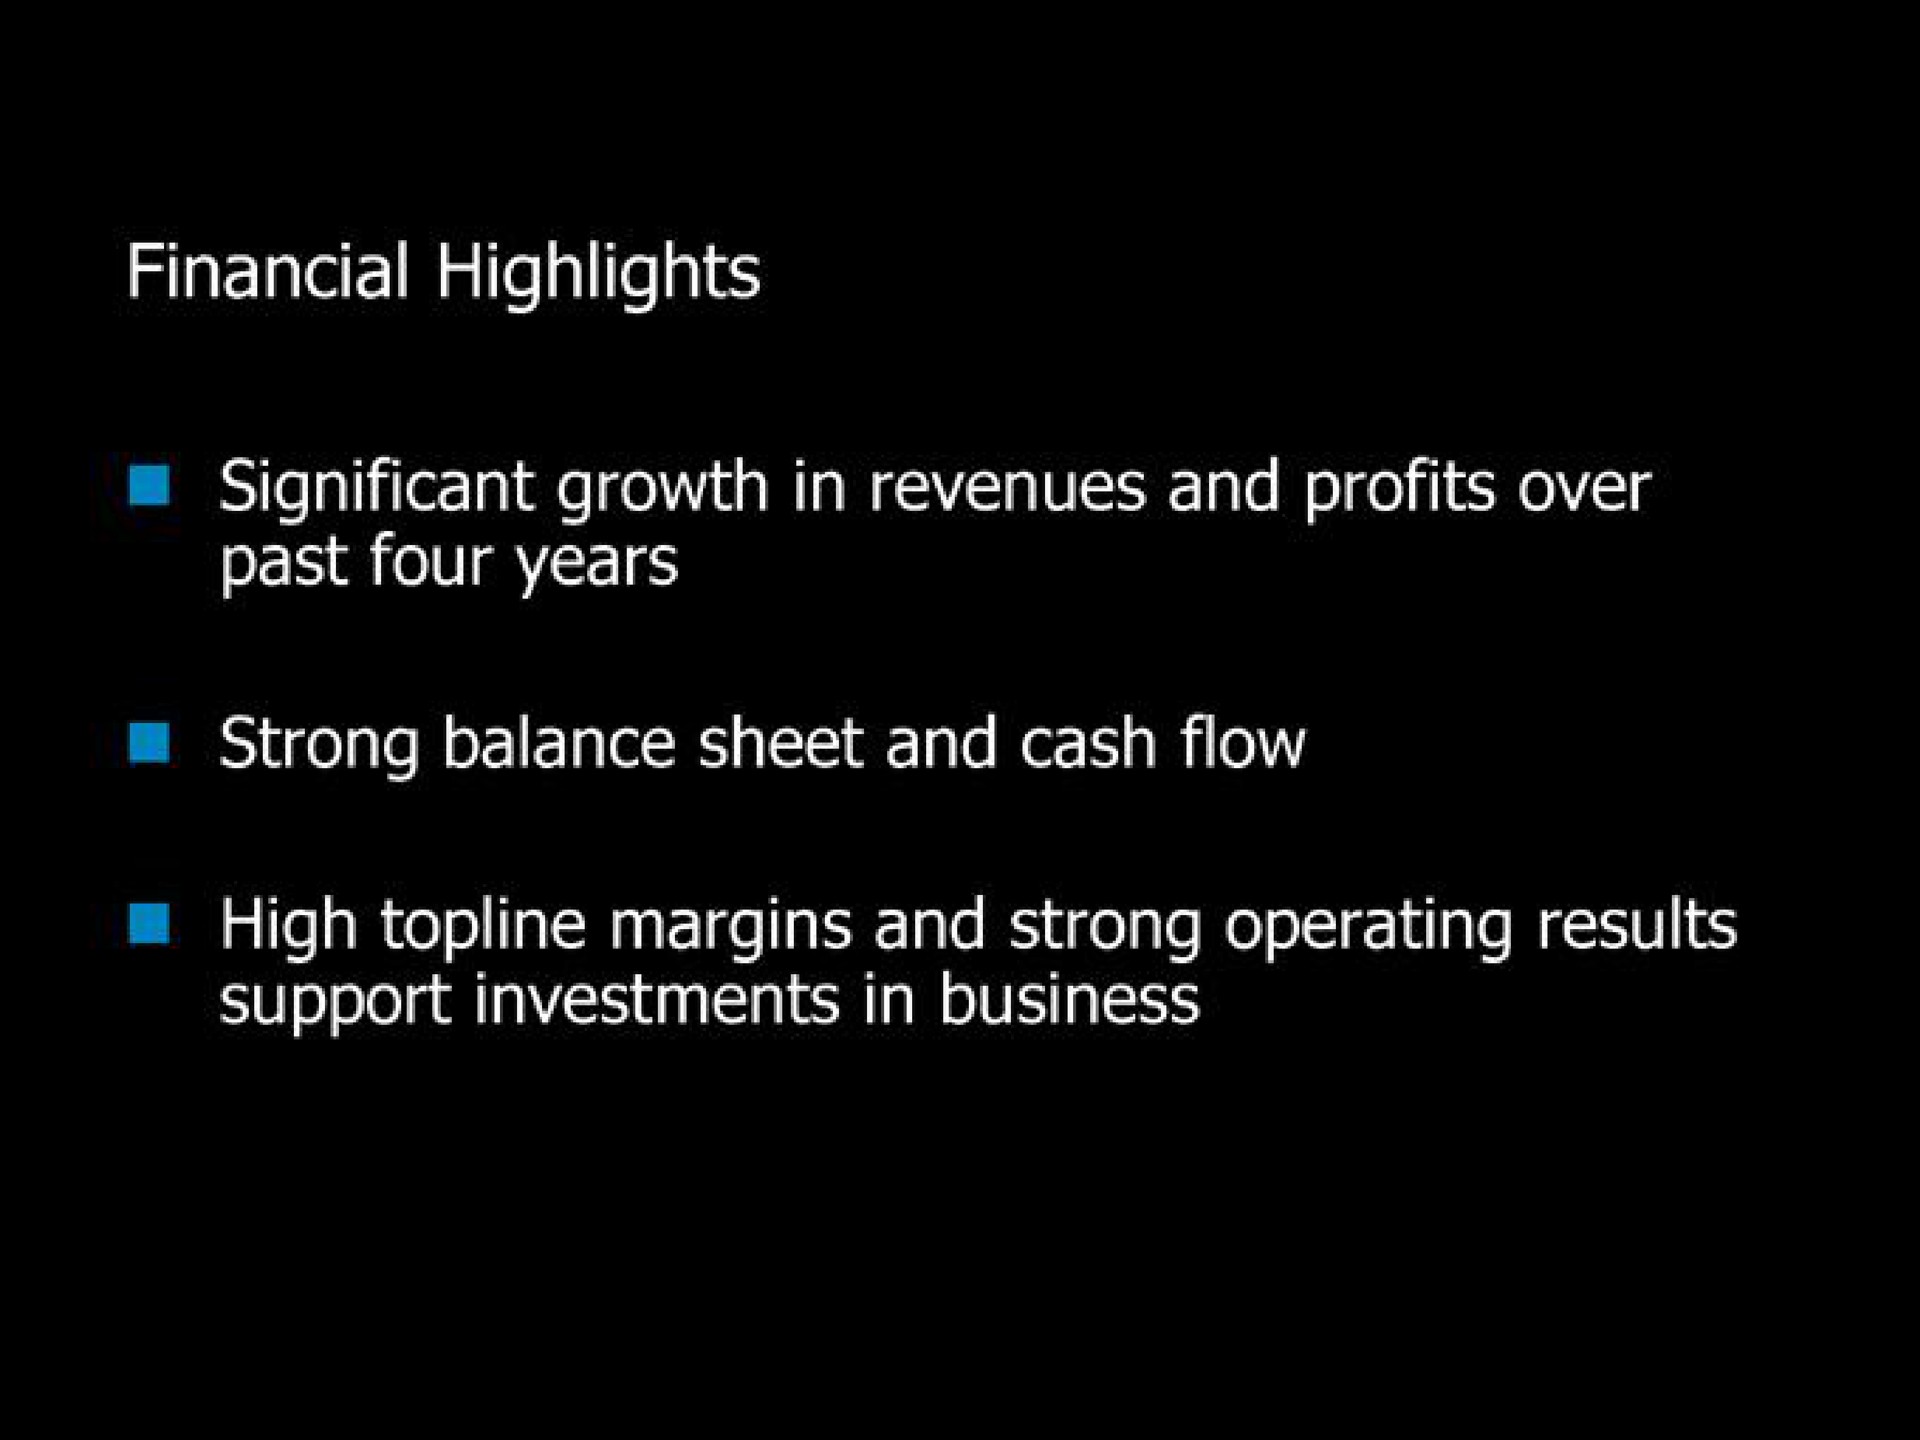 financial highlights significant growth in revenues and profits over high topline margins and strong operating results | Blockbuster Video